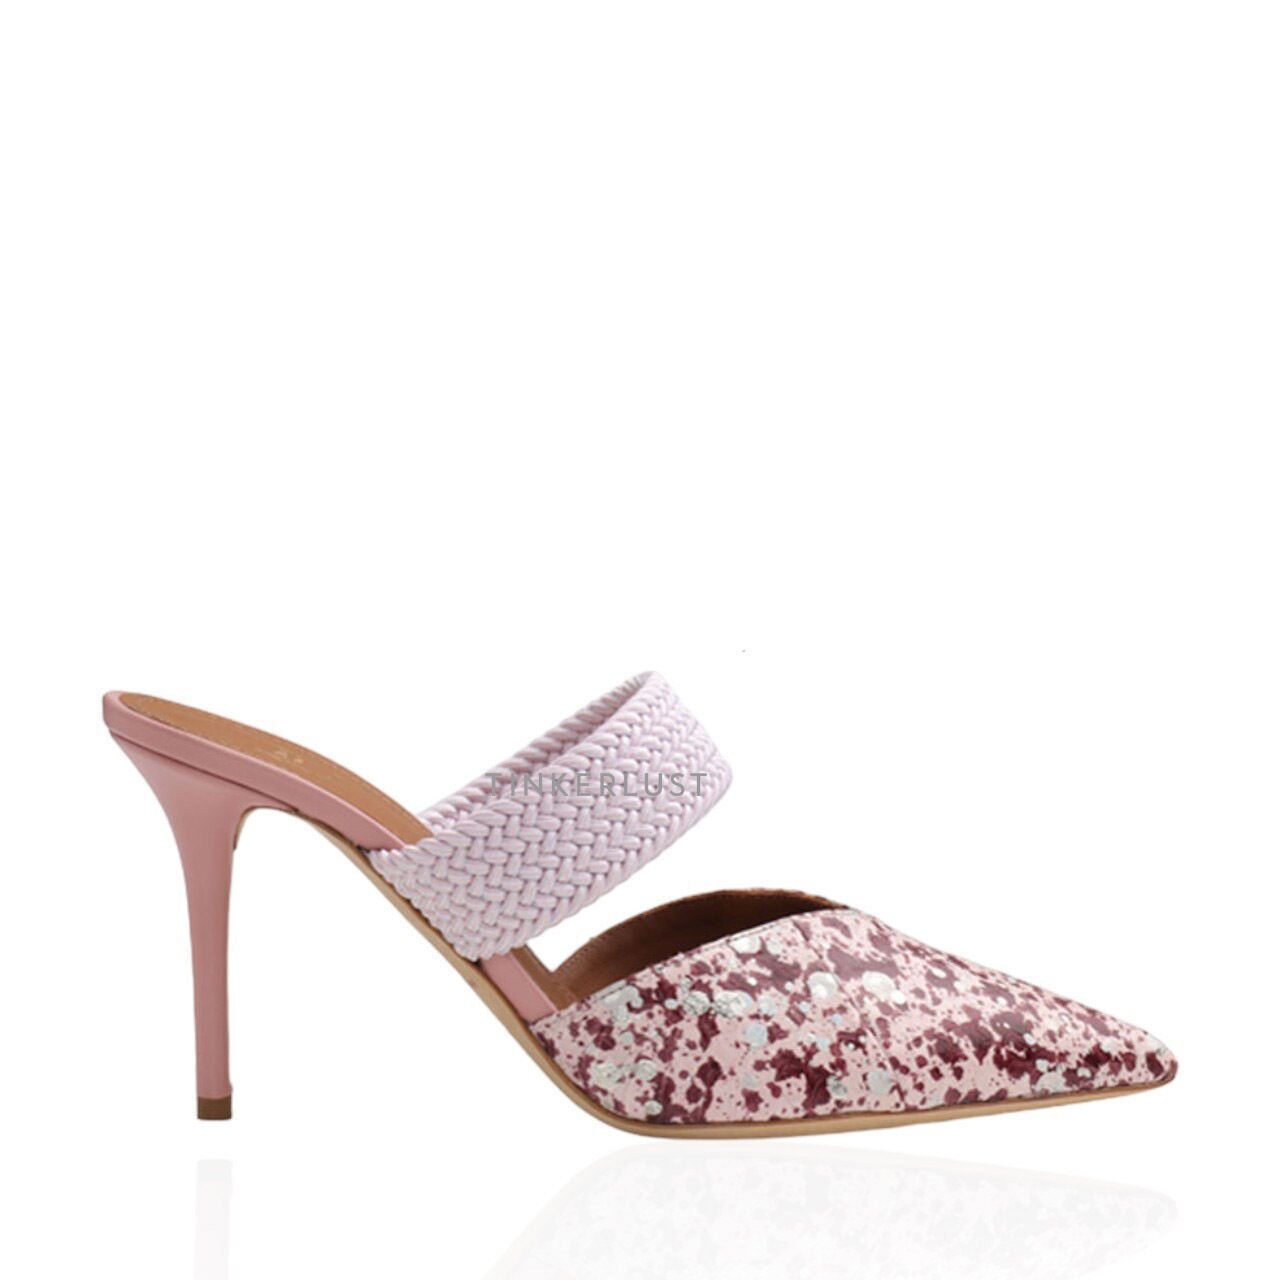 MALONE SOULIERS Maisie Heeled Mules 85mm in Rose/Pink Multicolor Embossed Leather with Tonal Trim